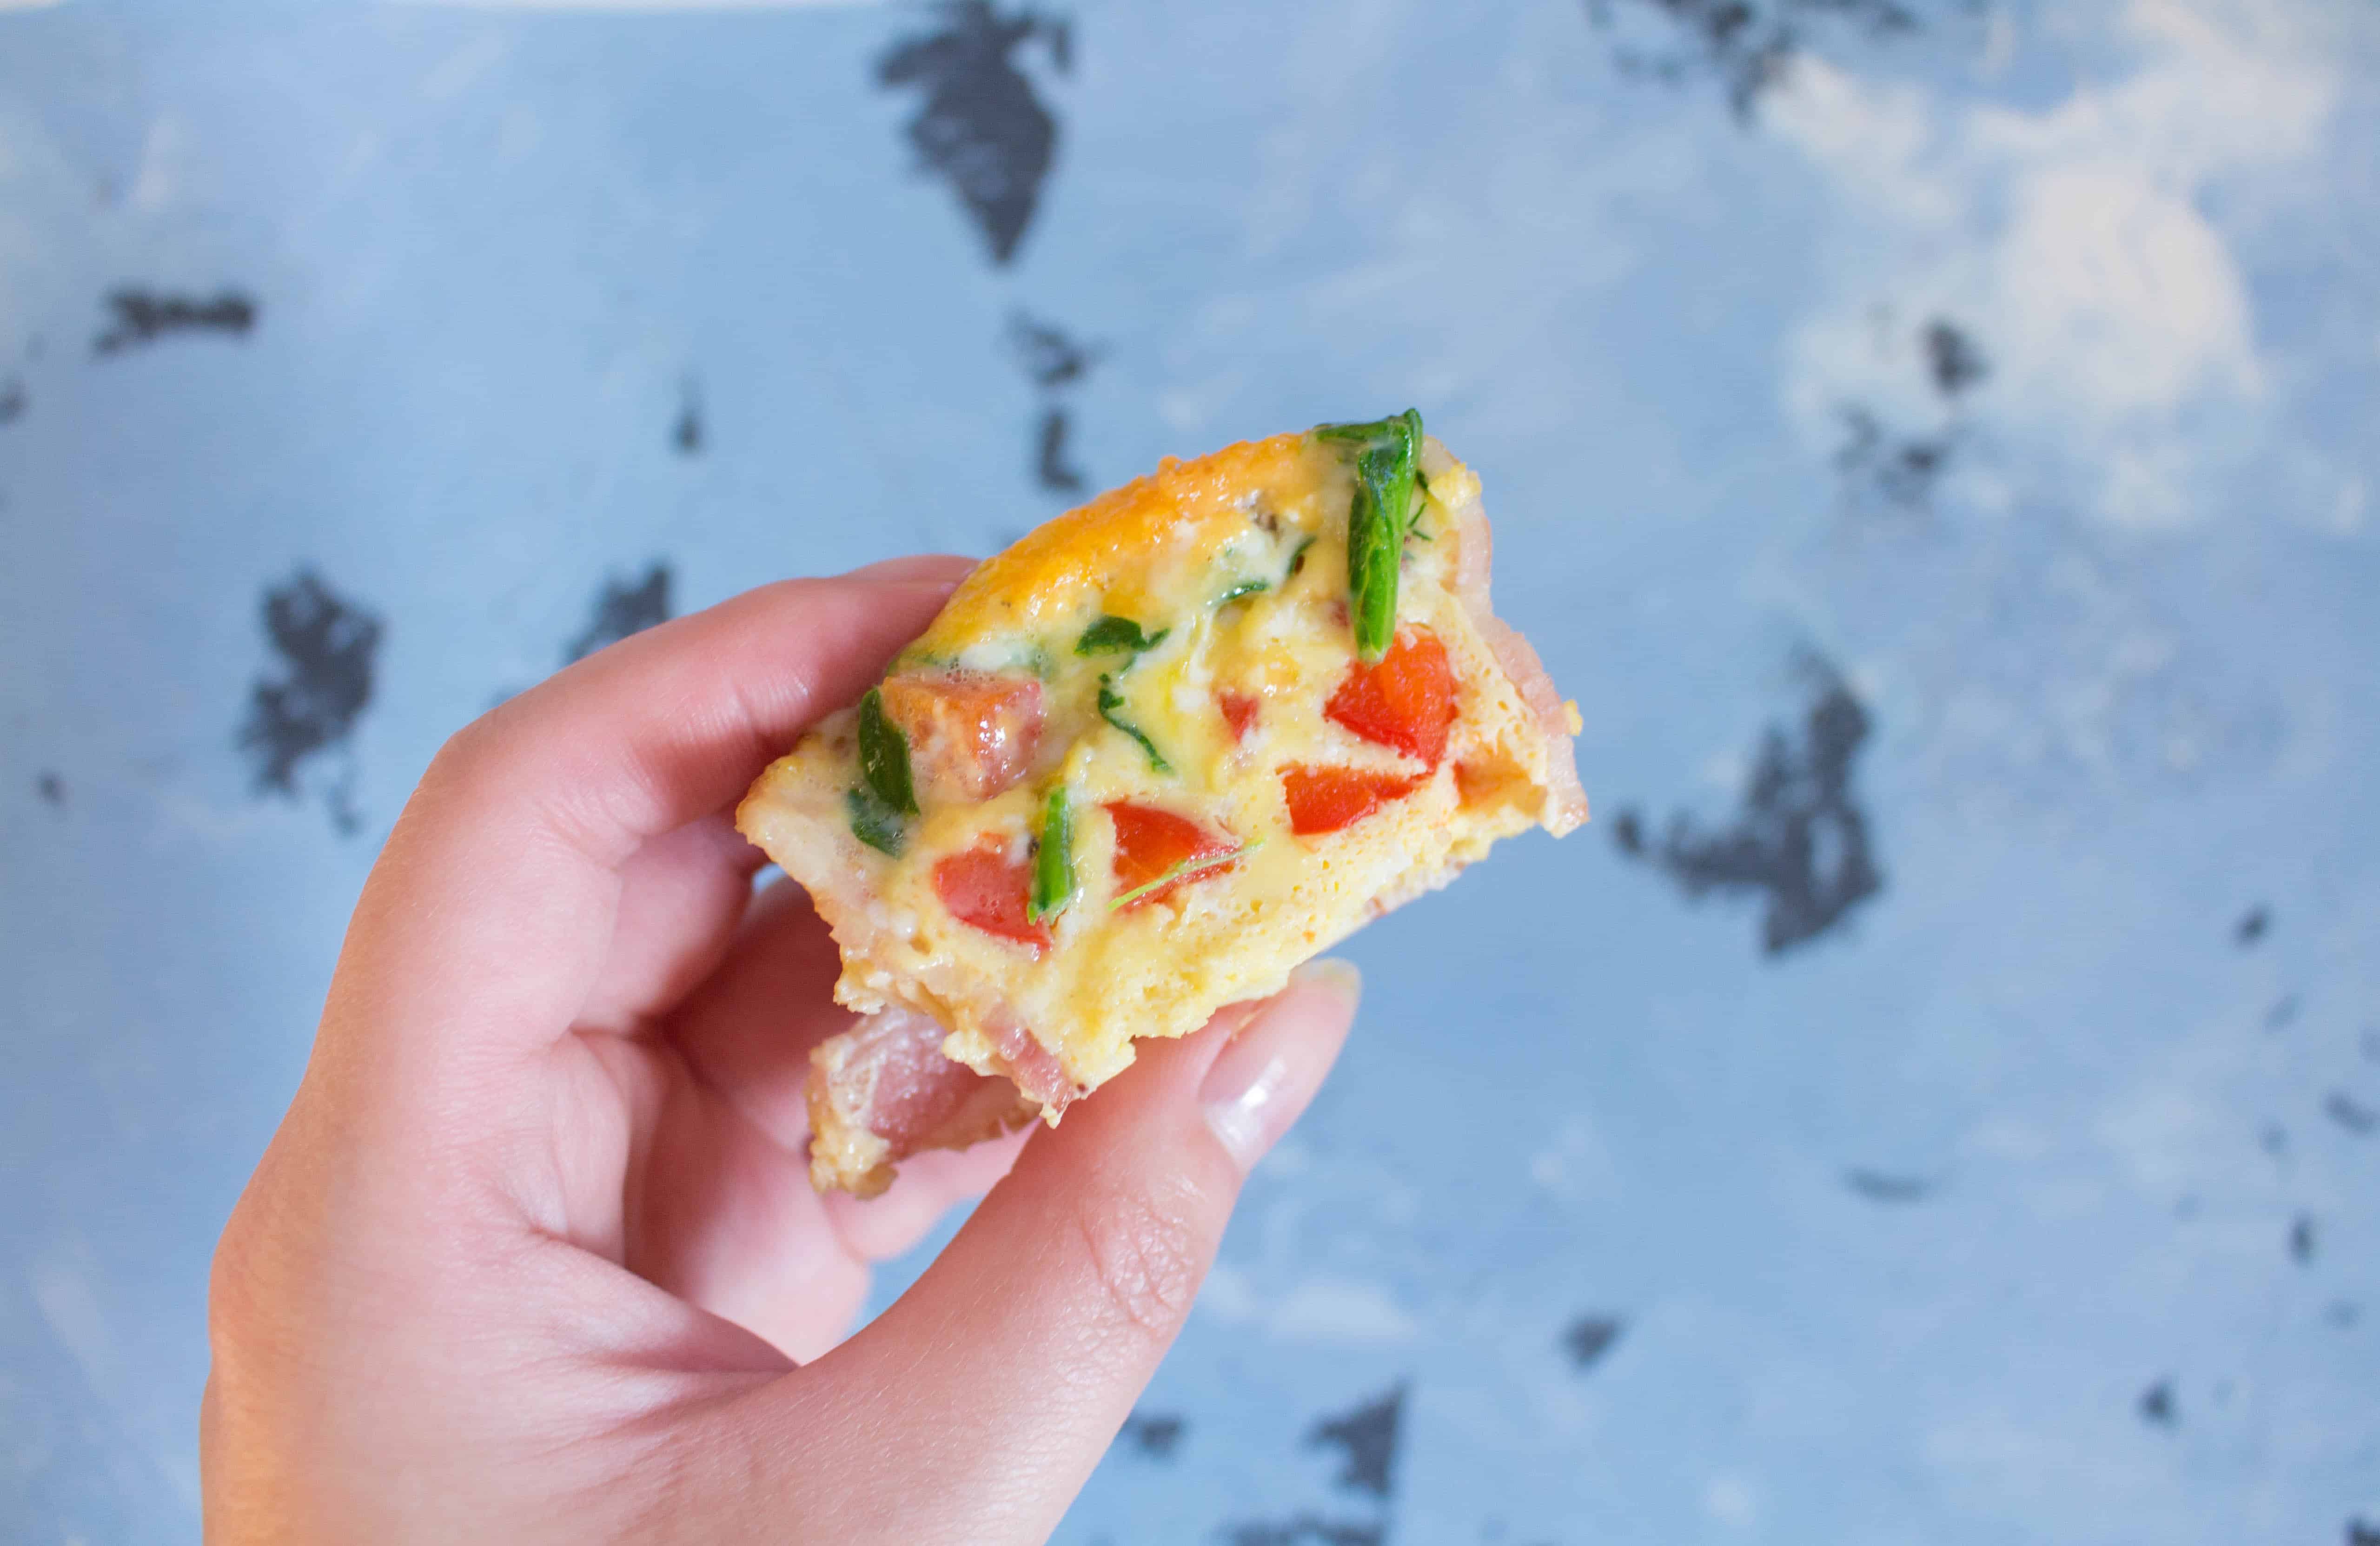 These Freezer Friendly Winter Spice Bacon Egg Cups are a delicious way to start off the day! Nutritious and delicious, these egg cups take less than 30 minutes to make and lasts up to a month in the freezer if you want to batch make them!